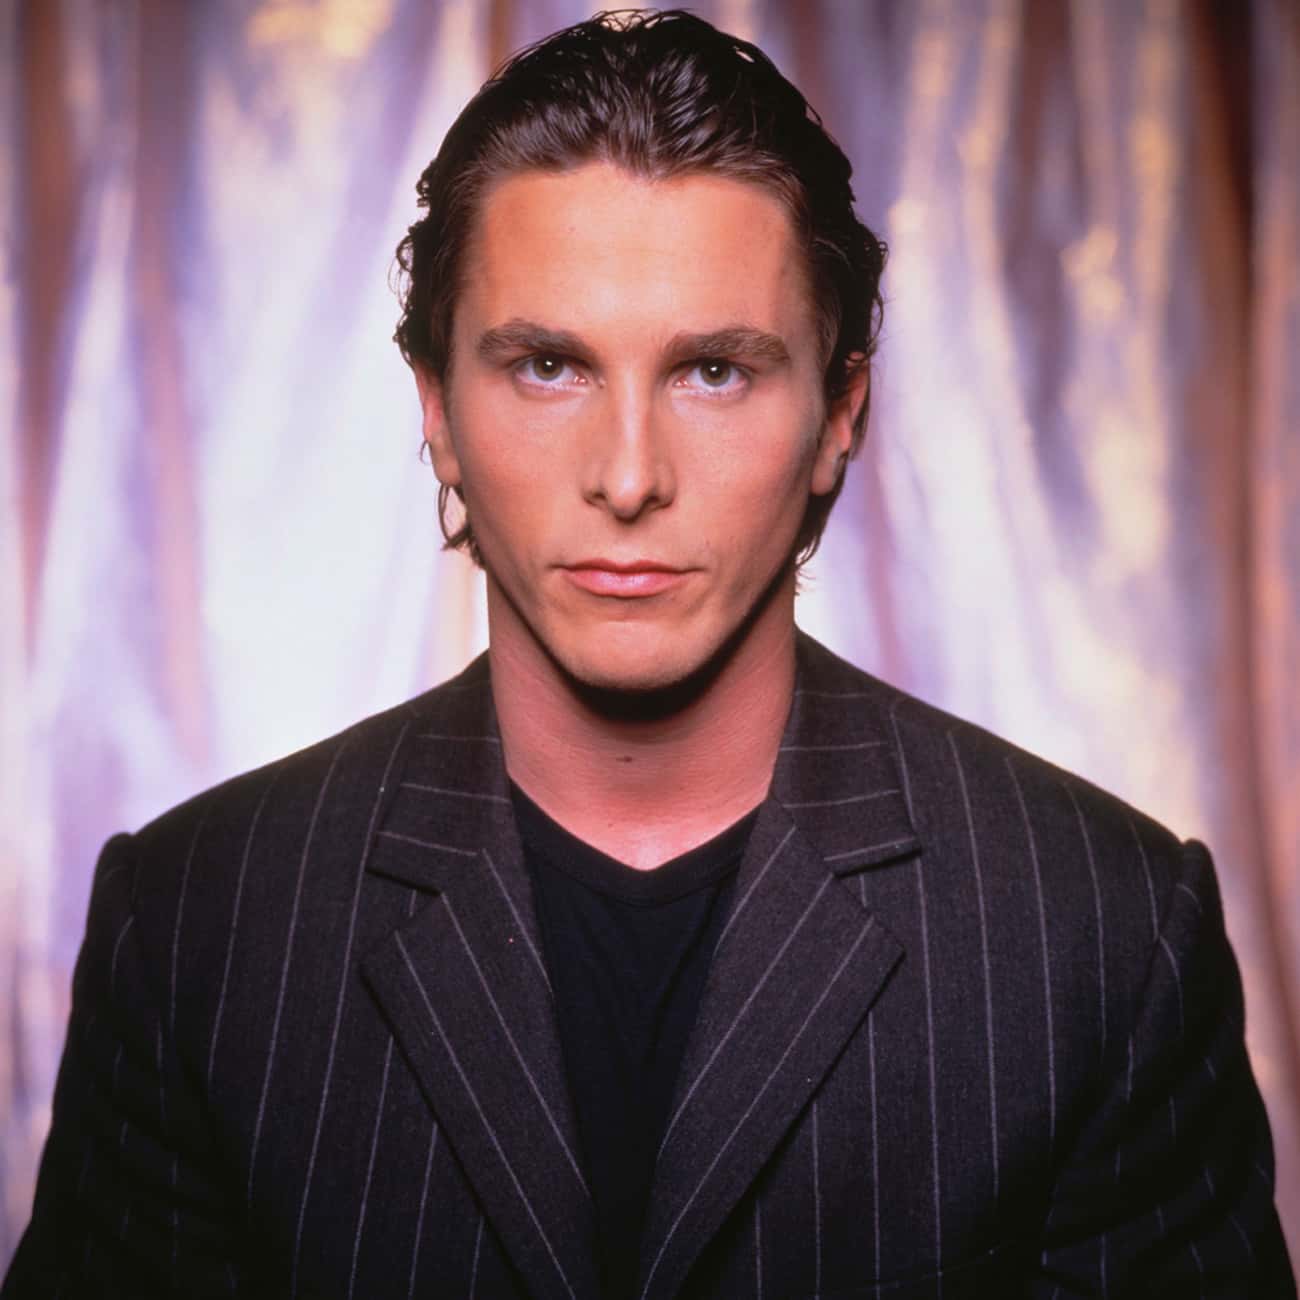 Young Christian Bale in Pinstripe Suit and Black T-Shirt